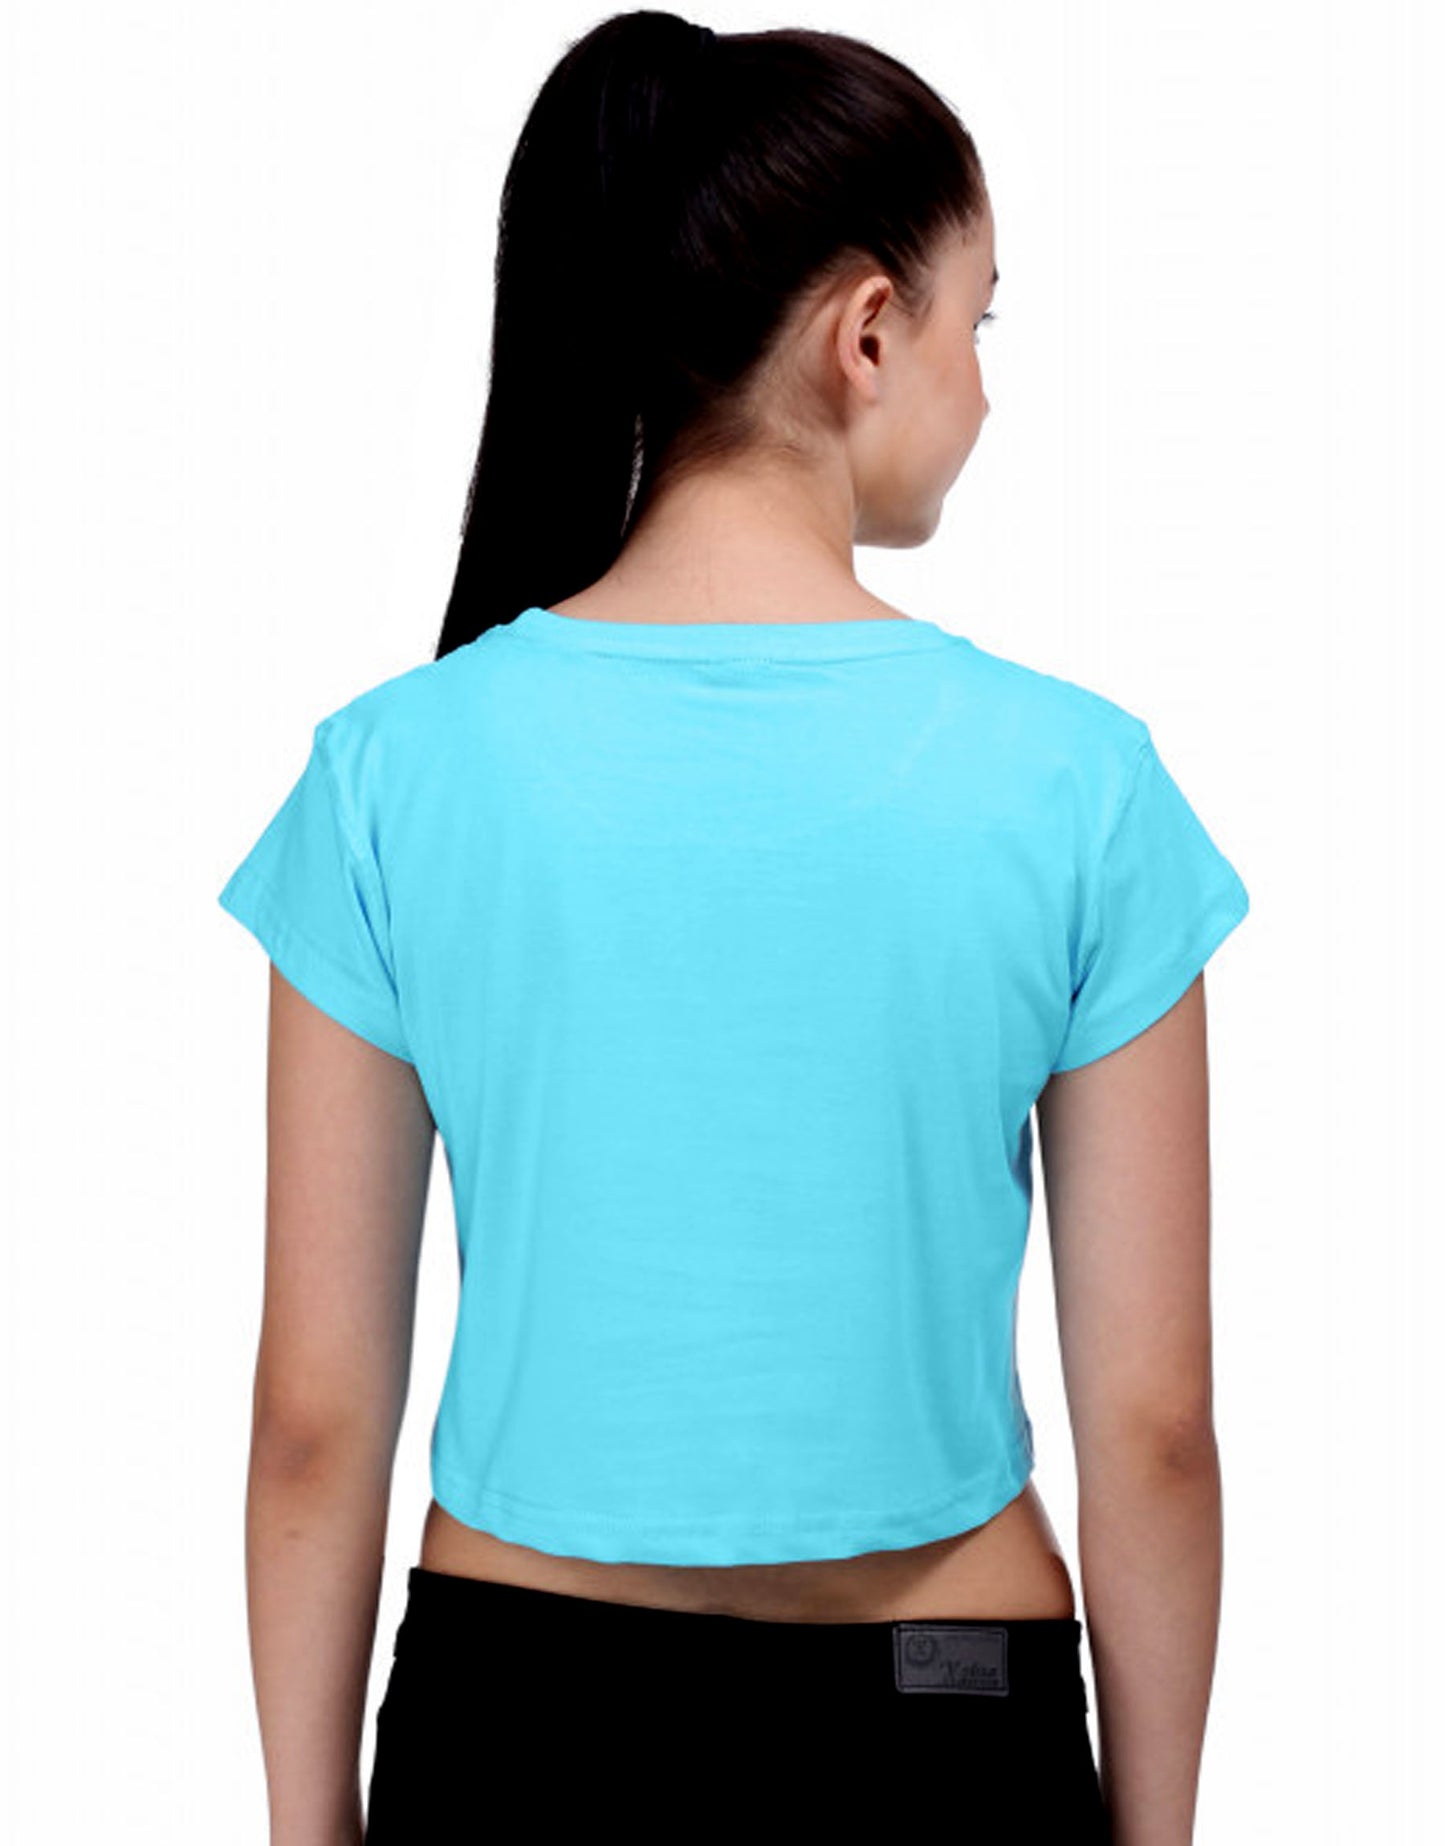 Sky Blue color - Stylish Short sleeve Crop Top for women